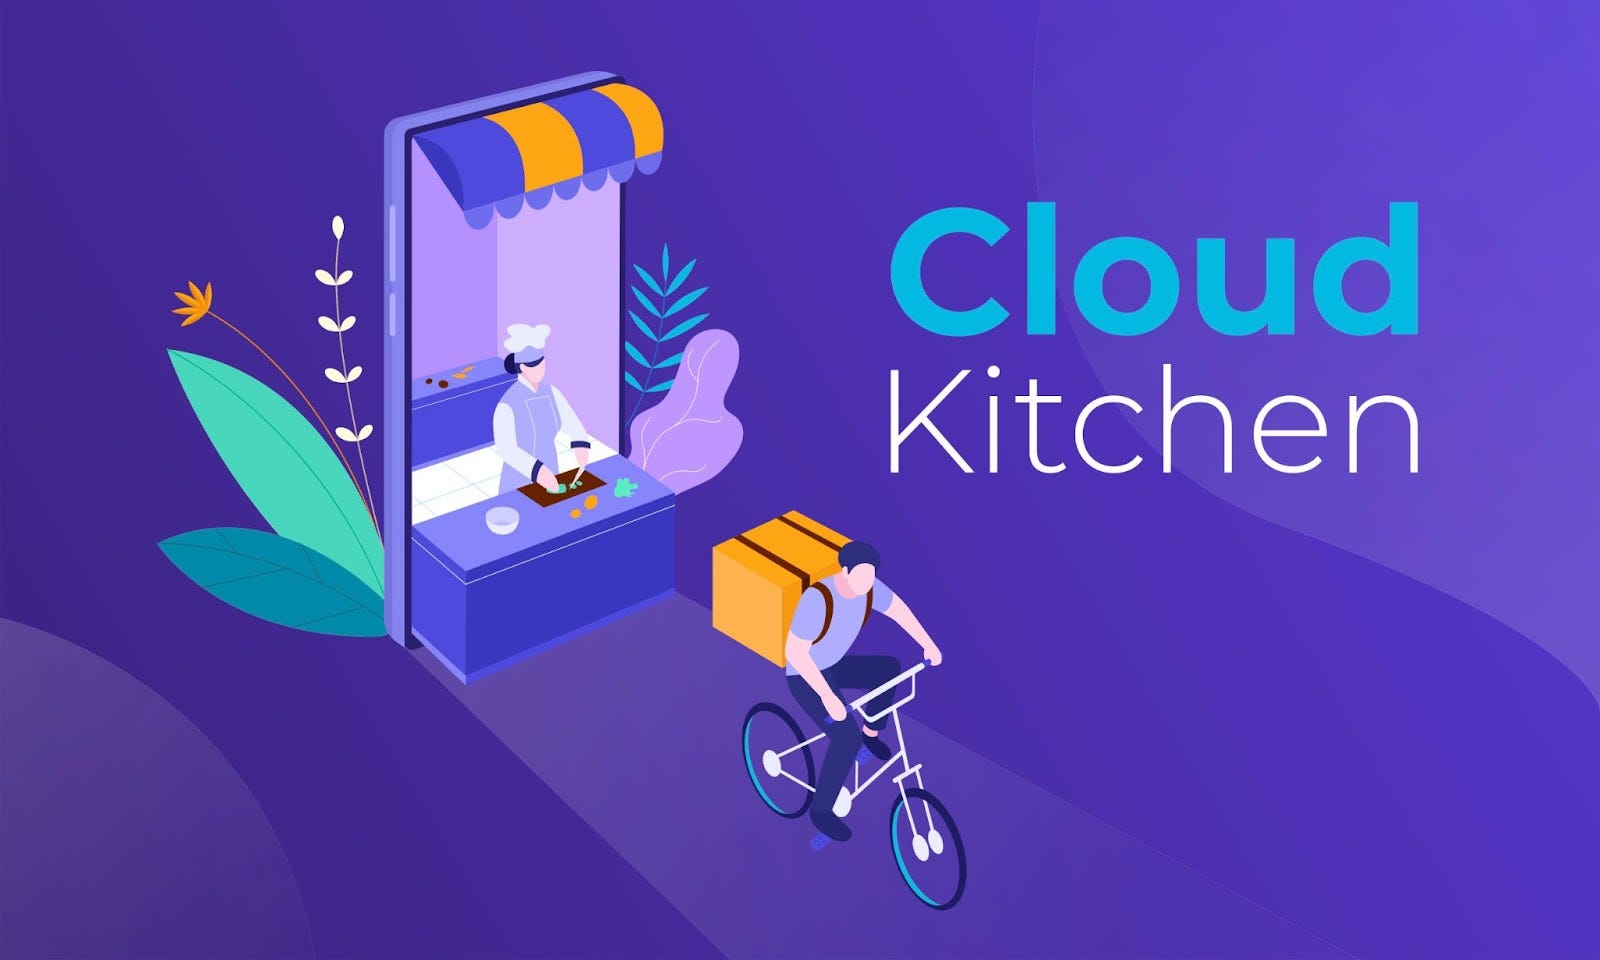 Cloud Kitchen - A great Business?